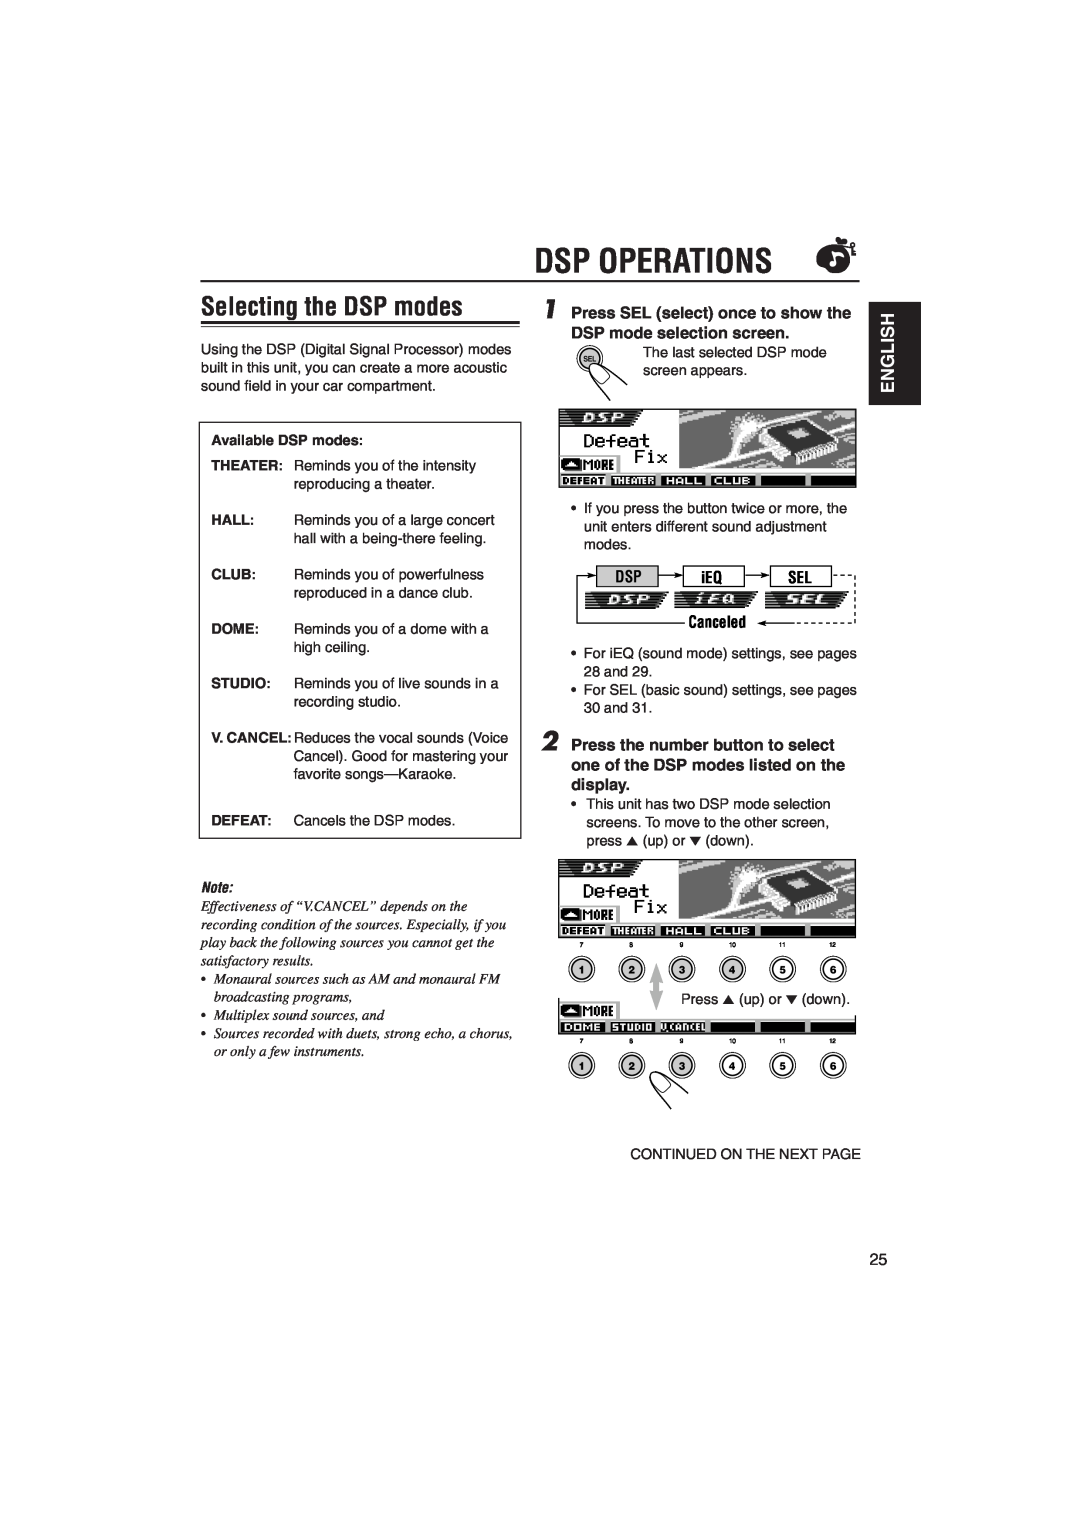 JVC KD-SH9105 manual Dsp Operations, Selecting the DSP modes, English, Press SEL select once to show the, Canceled 